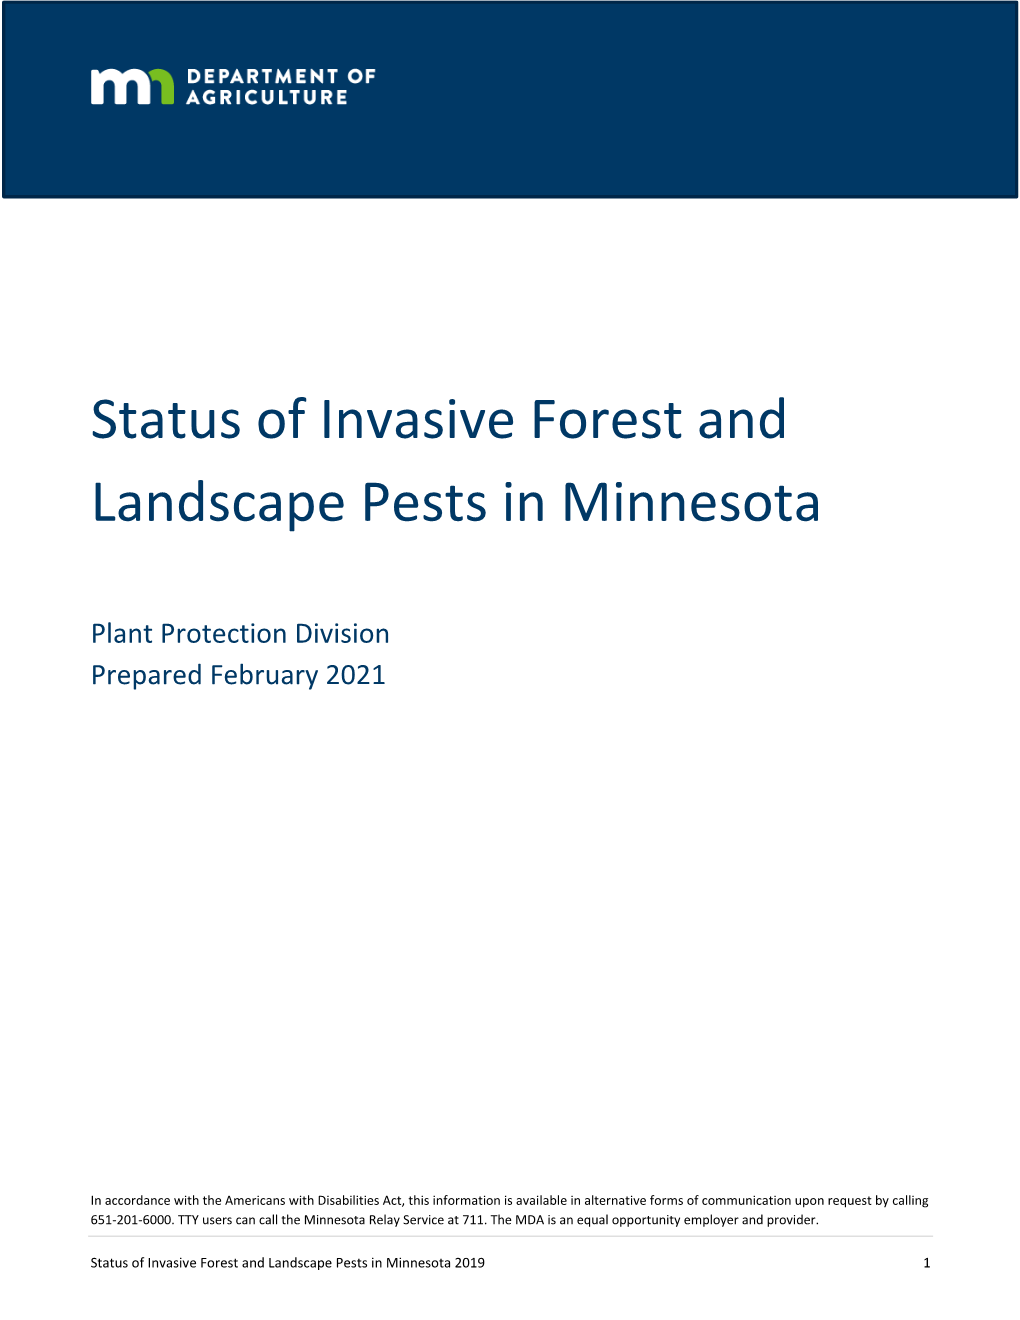 Status of Invasive Forest and Landscape Pests in Minnesota